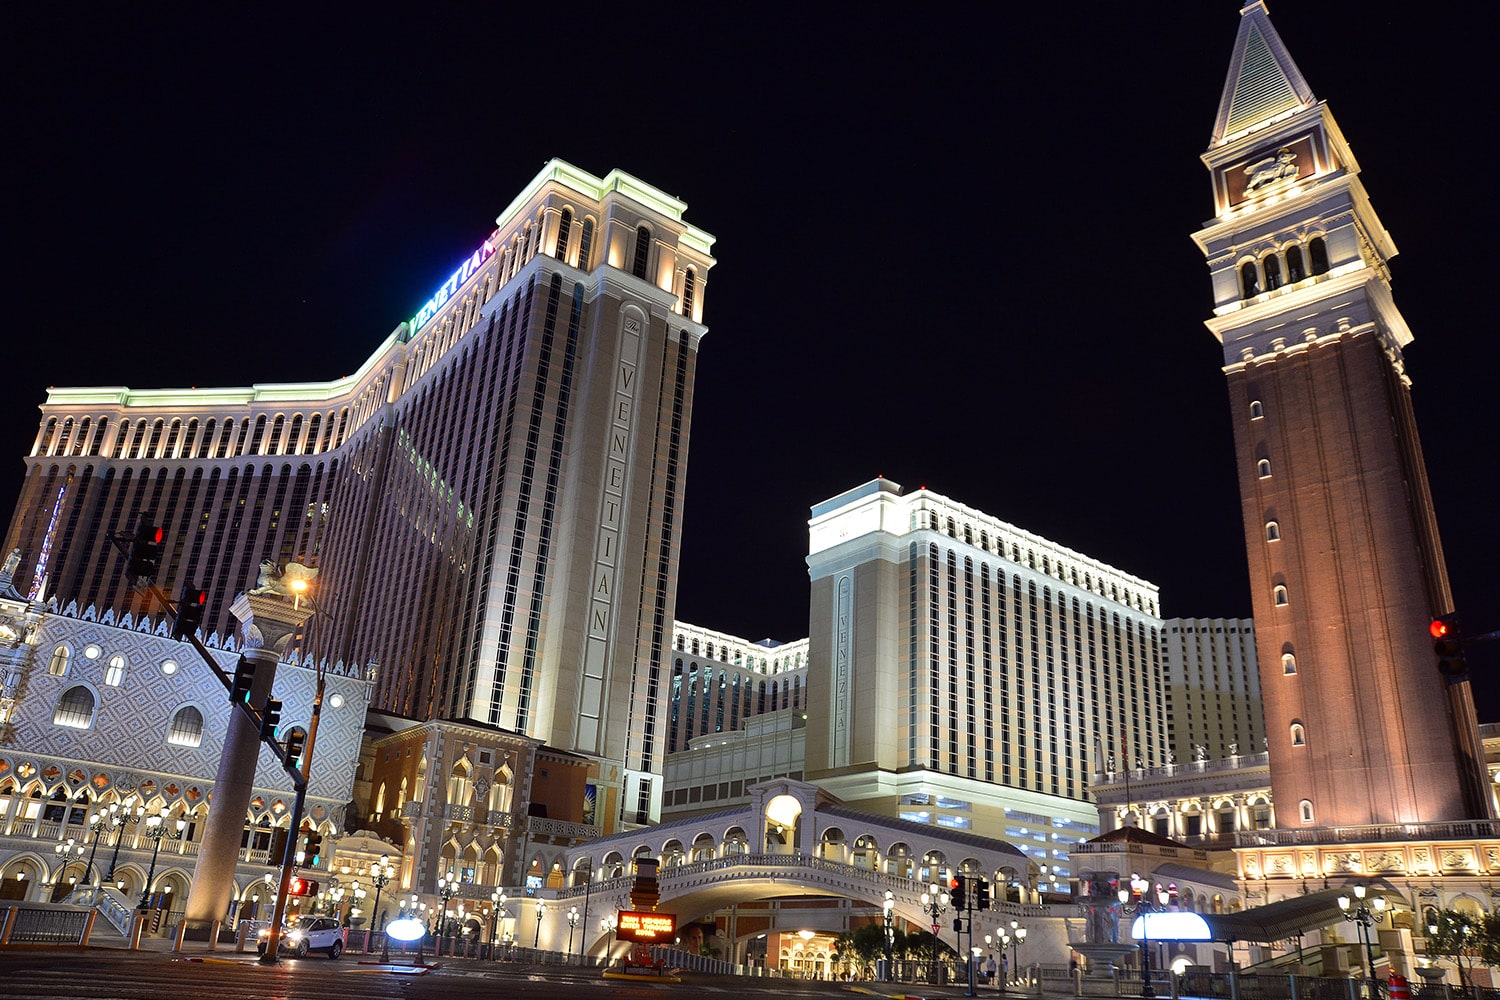 MGM Grand Hotel and Casino from $1. Las Vegas Hotel Deals